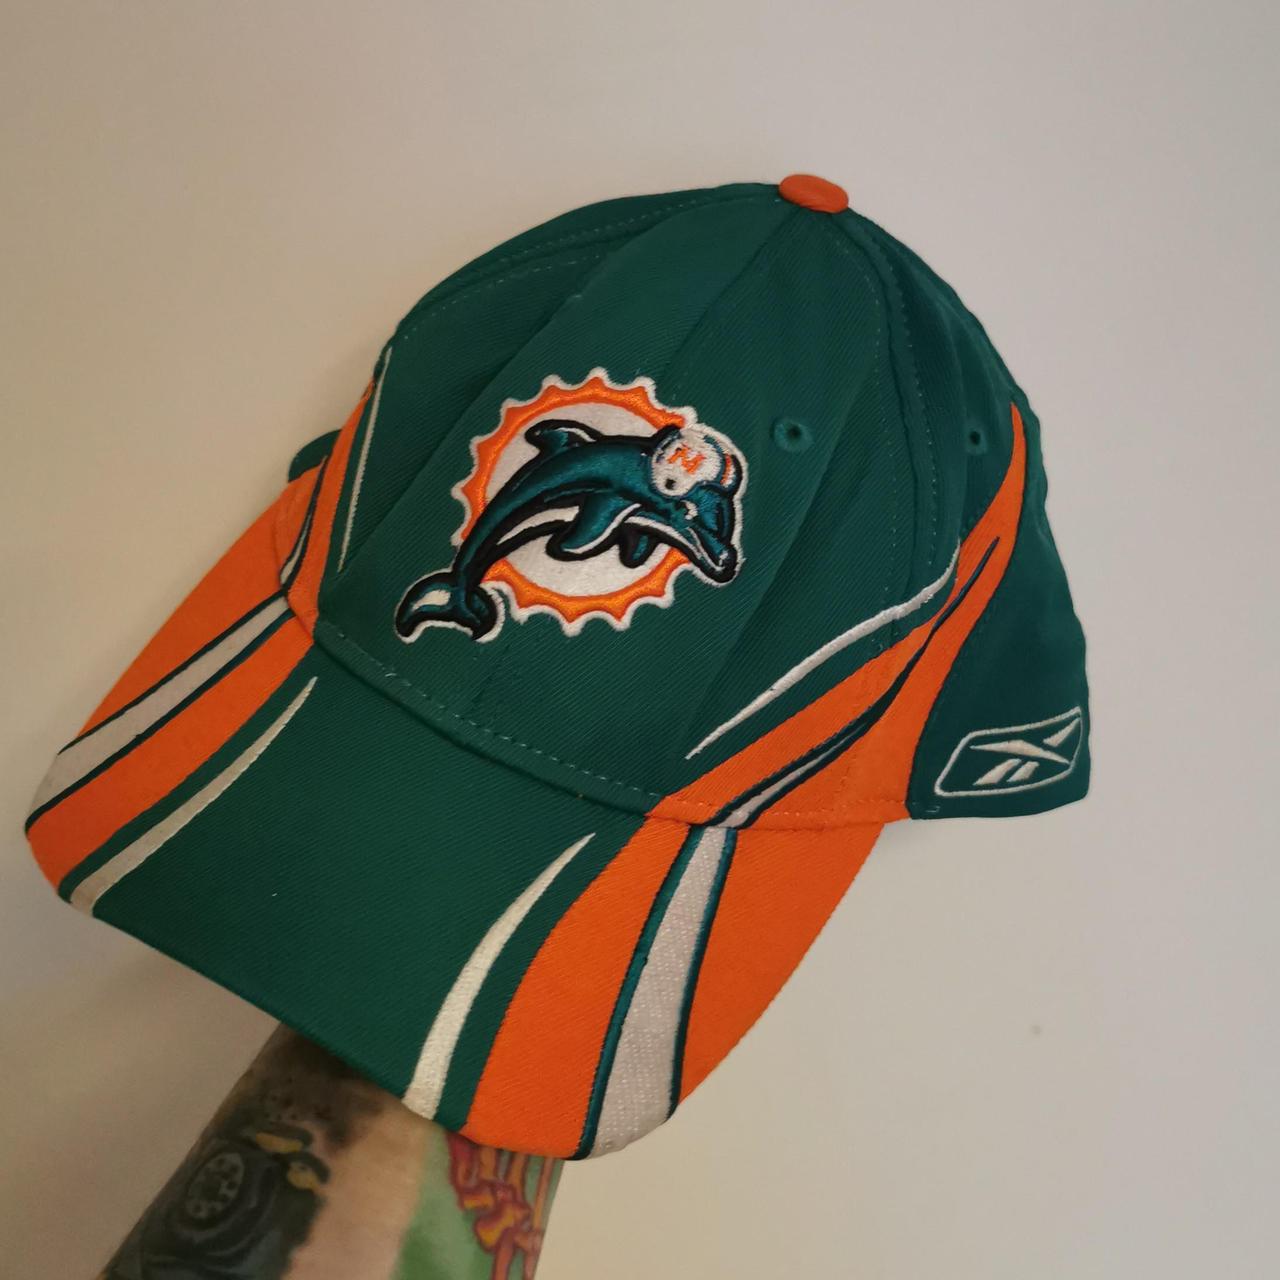 Product Image 1 - Reebok official nfl miami dolphins